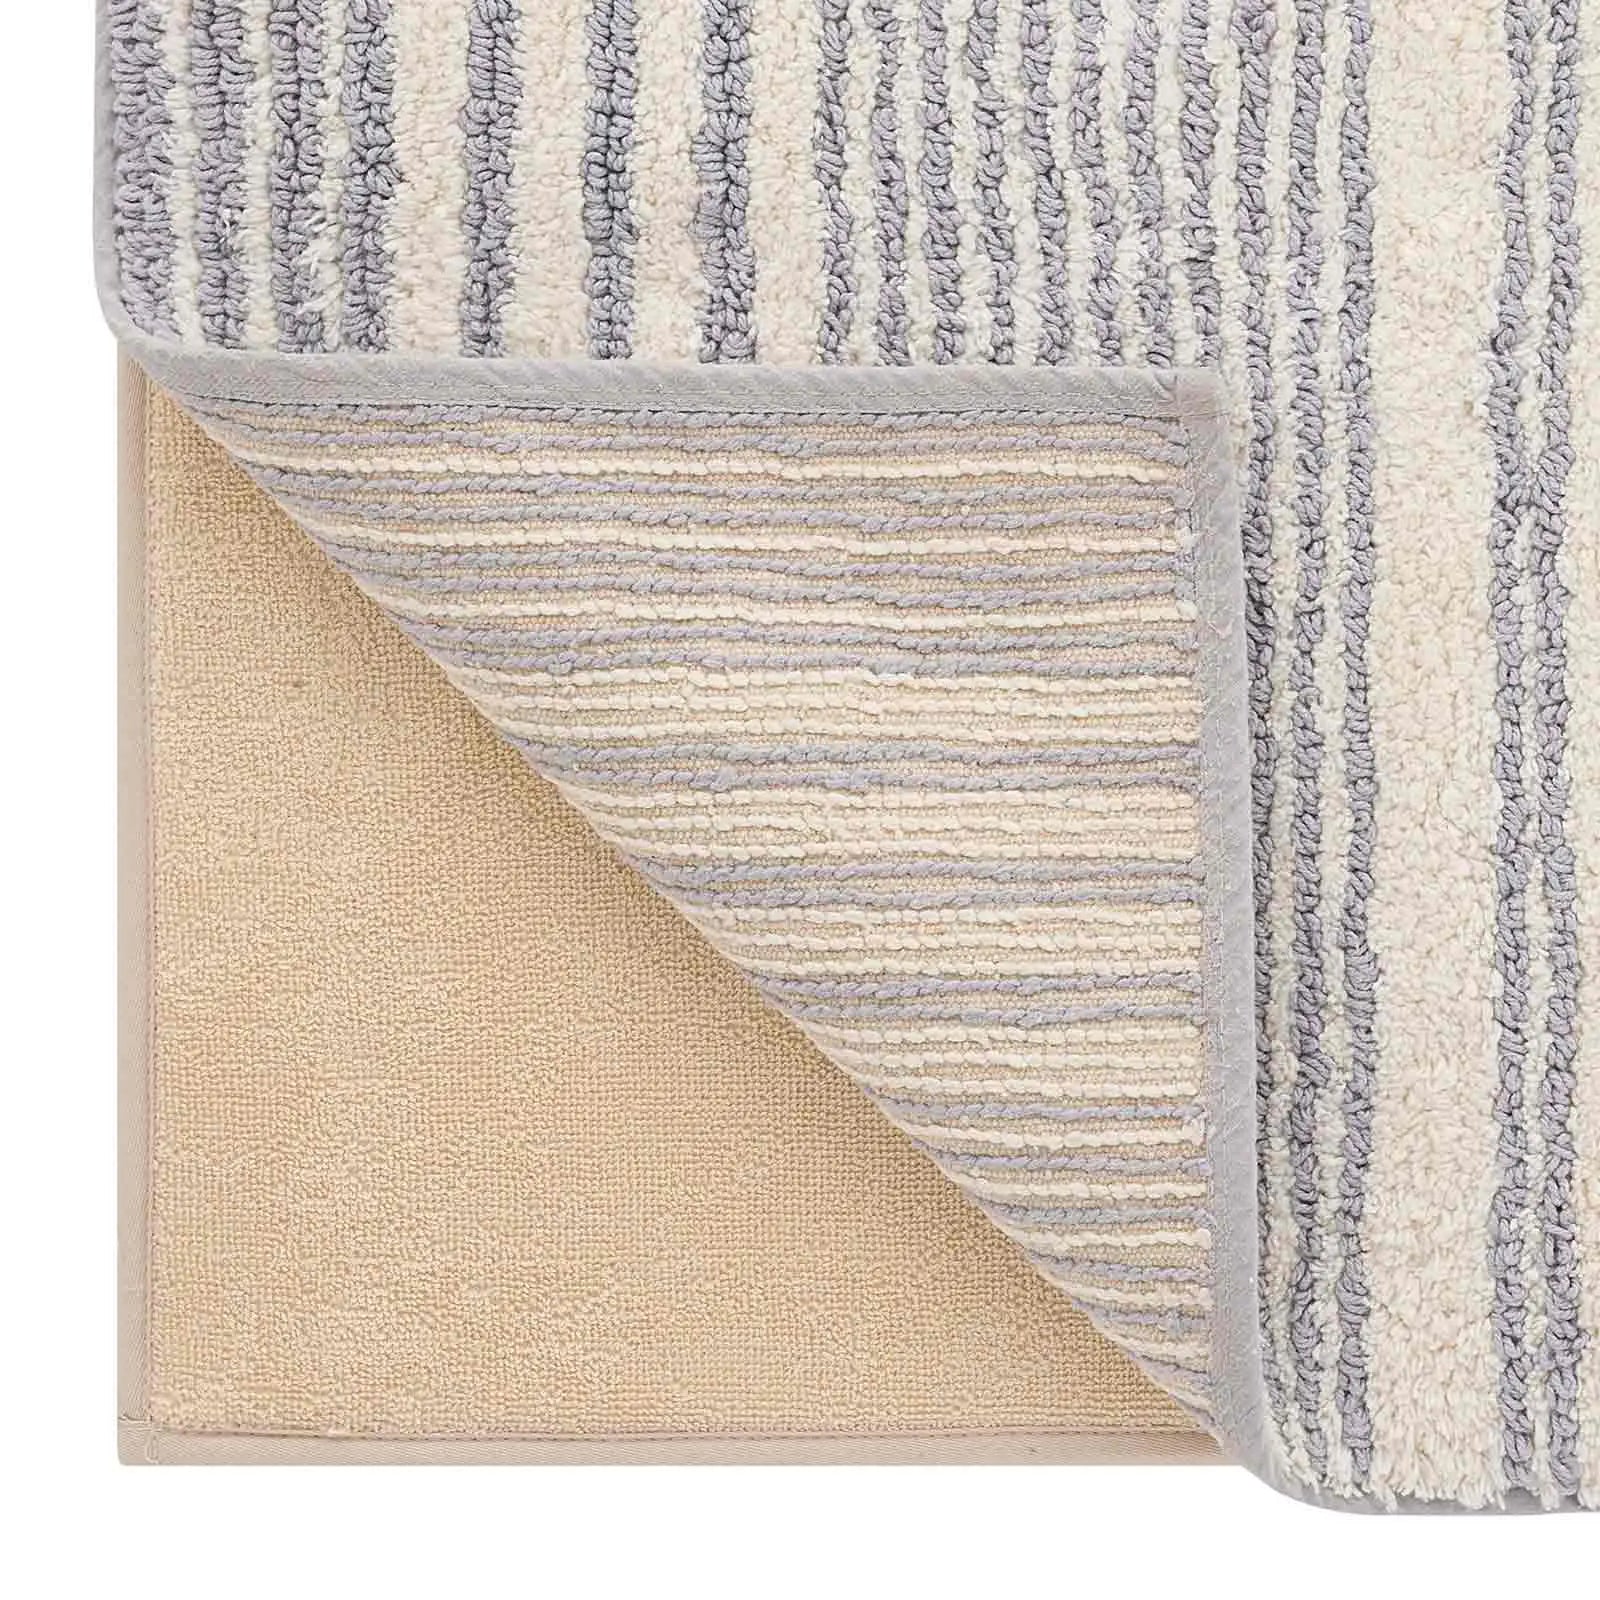 Coastal Nantucket blue and white stripe bath mat close up of a lifted corner of the mat showing the liner beneath